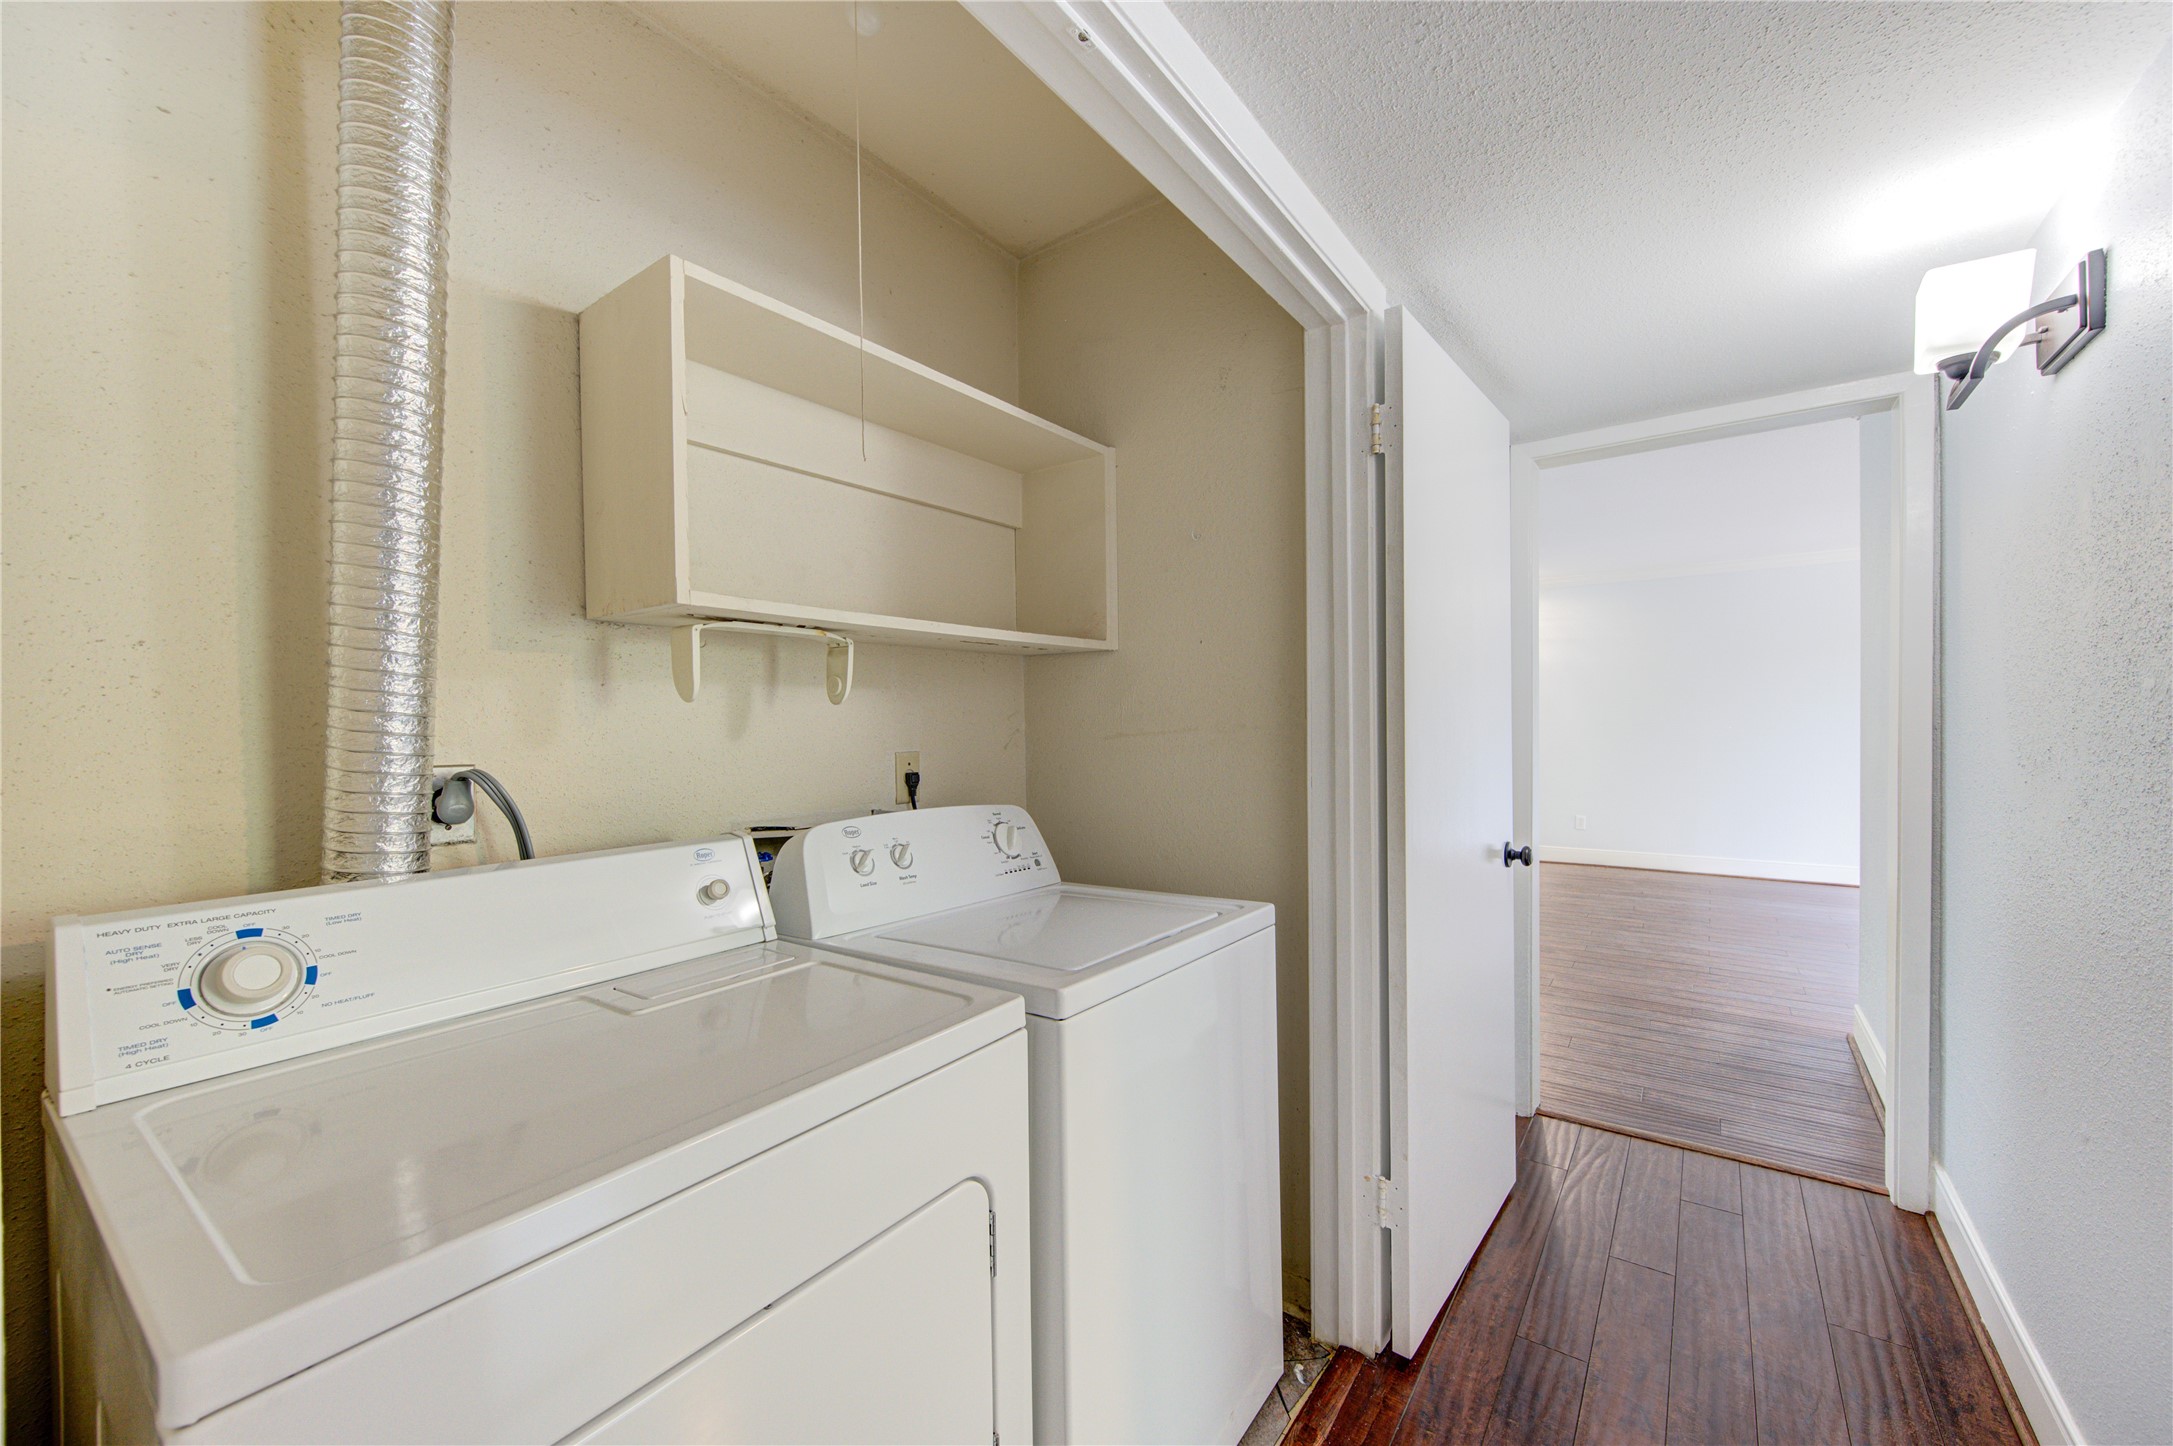 You'll find your full size washer and dryer tucked behind double doors next to the secondary bath. The washer dryer stay with the unit!